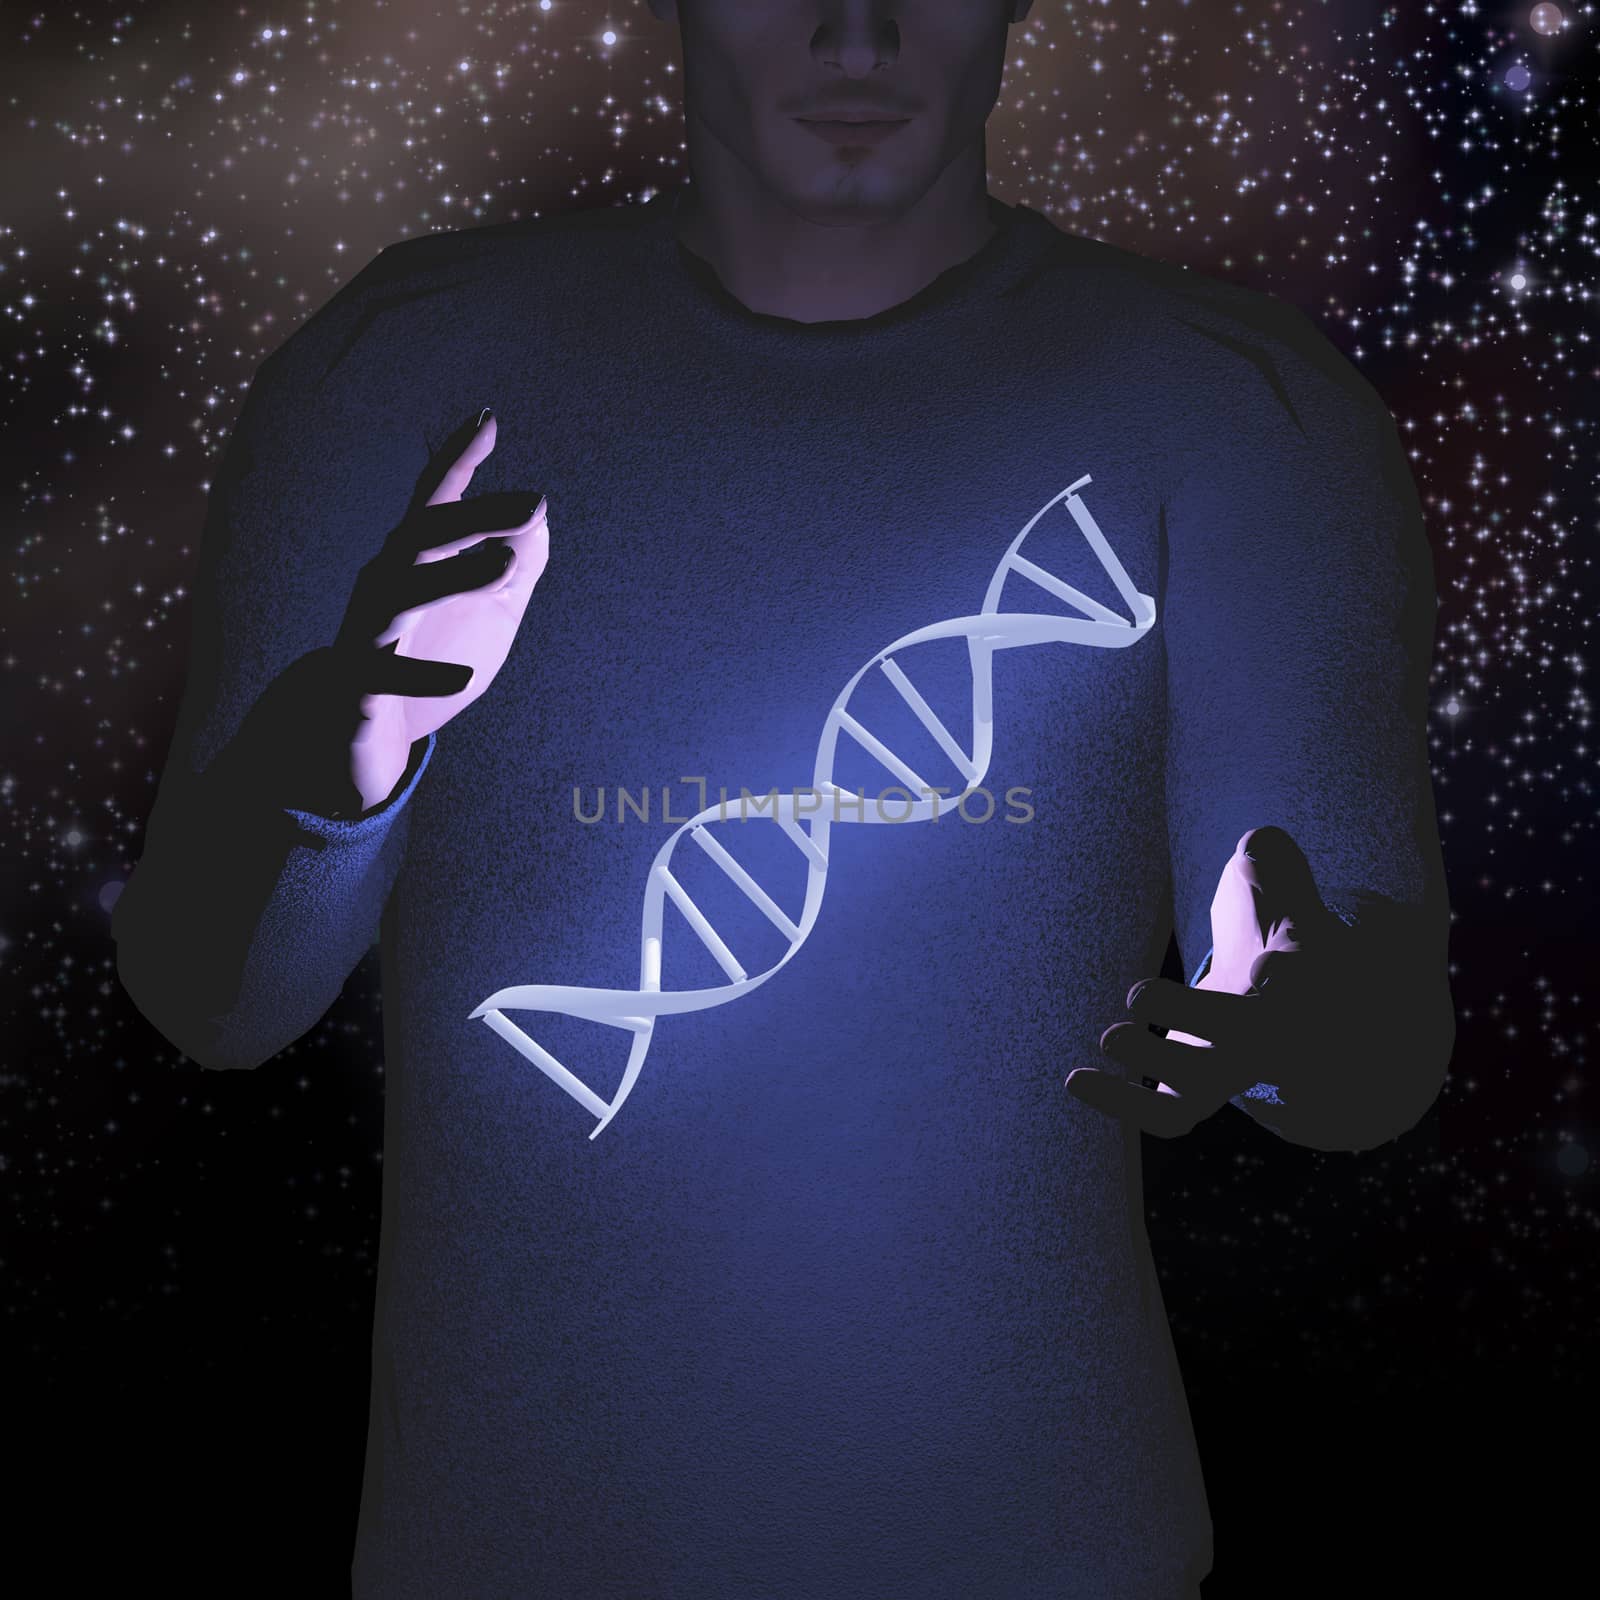 DNA and Stars by applesstock